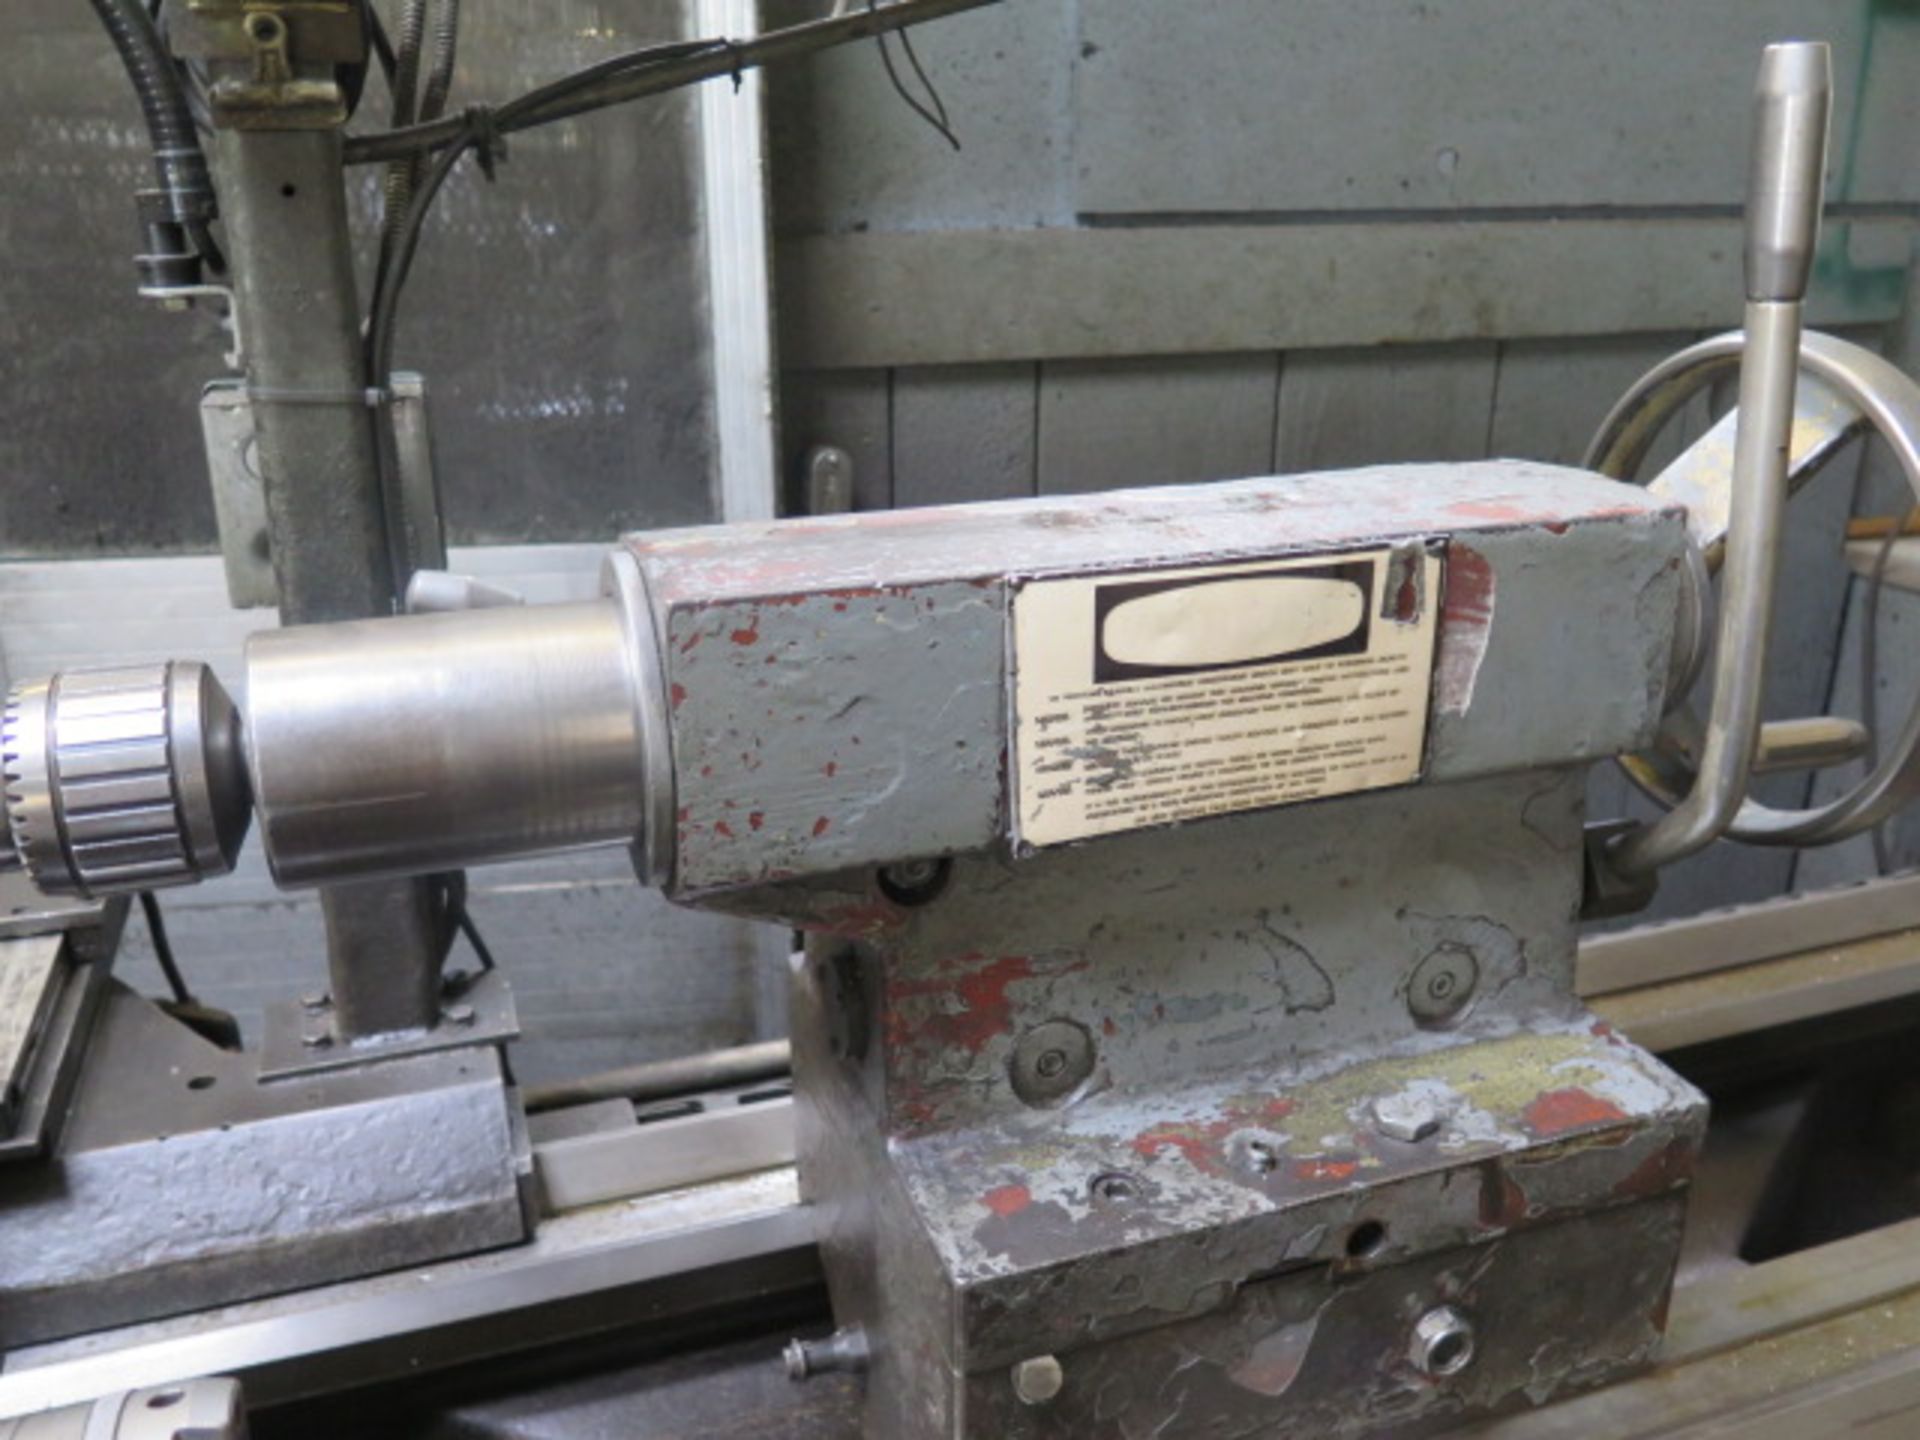 Polamco TUR-63 Big-Bore 25” x 120” Geared Head Gap Bed Lathe s/n 41189 w/ Mitutoyo DRO, SOLD AS IS - Image 8 of 14